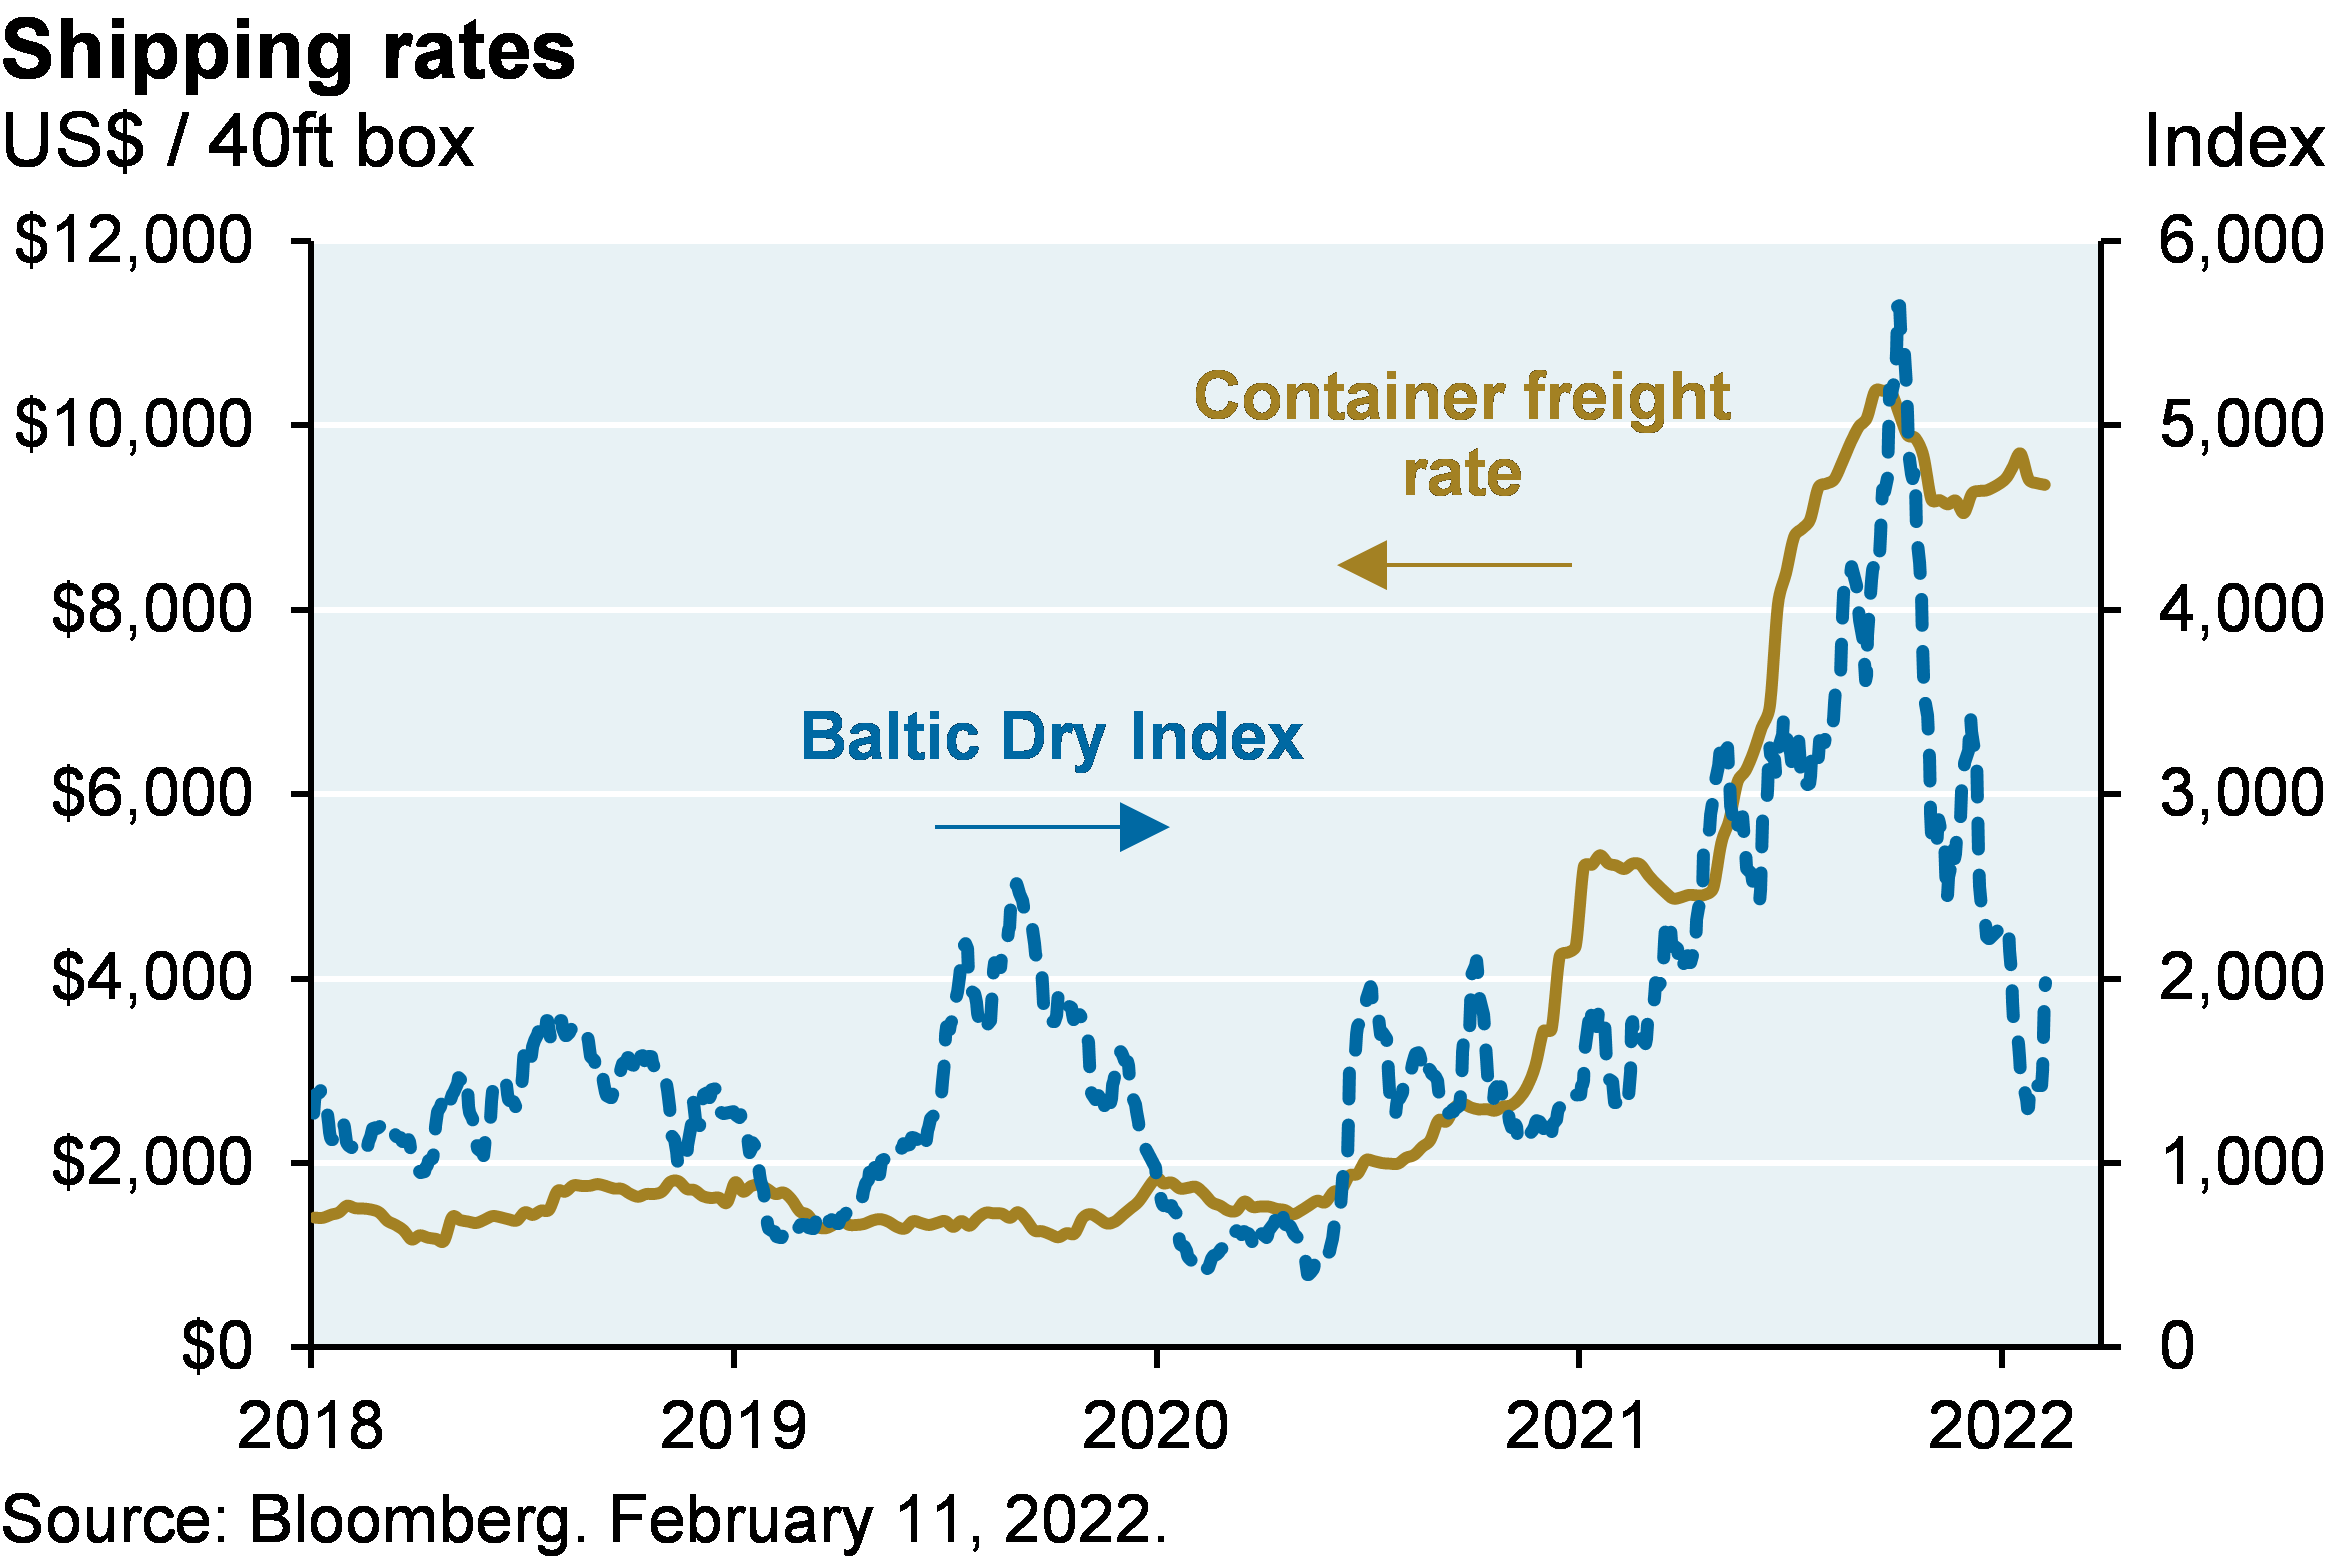 Line chart shows the container freight rate shown in US dollars per 40ft box and shows the Baltic Dry Index since 2018. The container freight rate steadily increased from January 2019 to its highest point of over $10,000 in September 2021. The rate has since fallen slightly below $10,000. The Baltic Dry Index remained at a level of 1000-2000 until it spiked to above 5,000, the highest level since 2010. However, as of February 2022, the index has fallen to 2,000. 